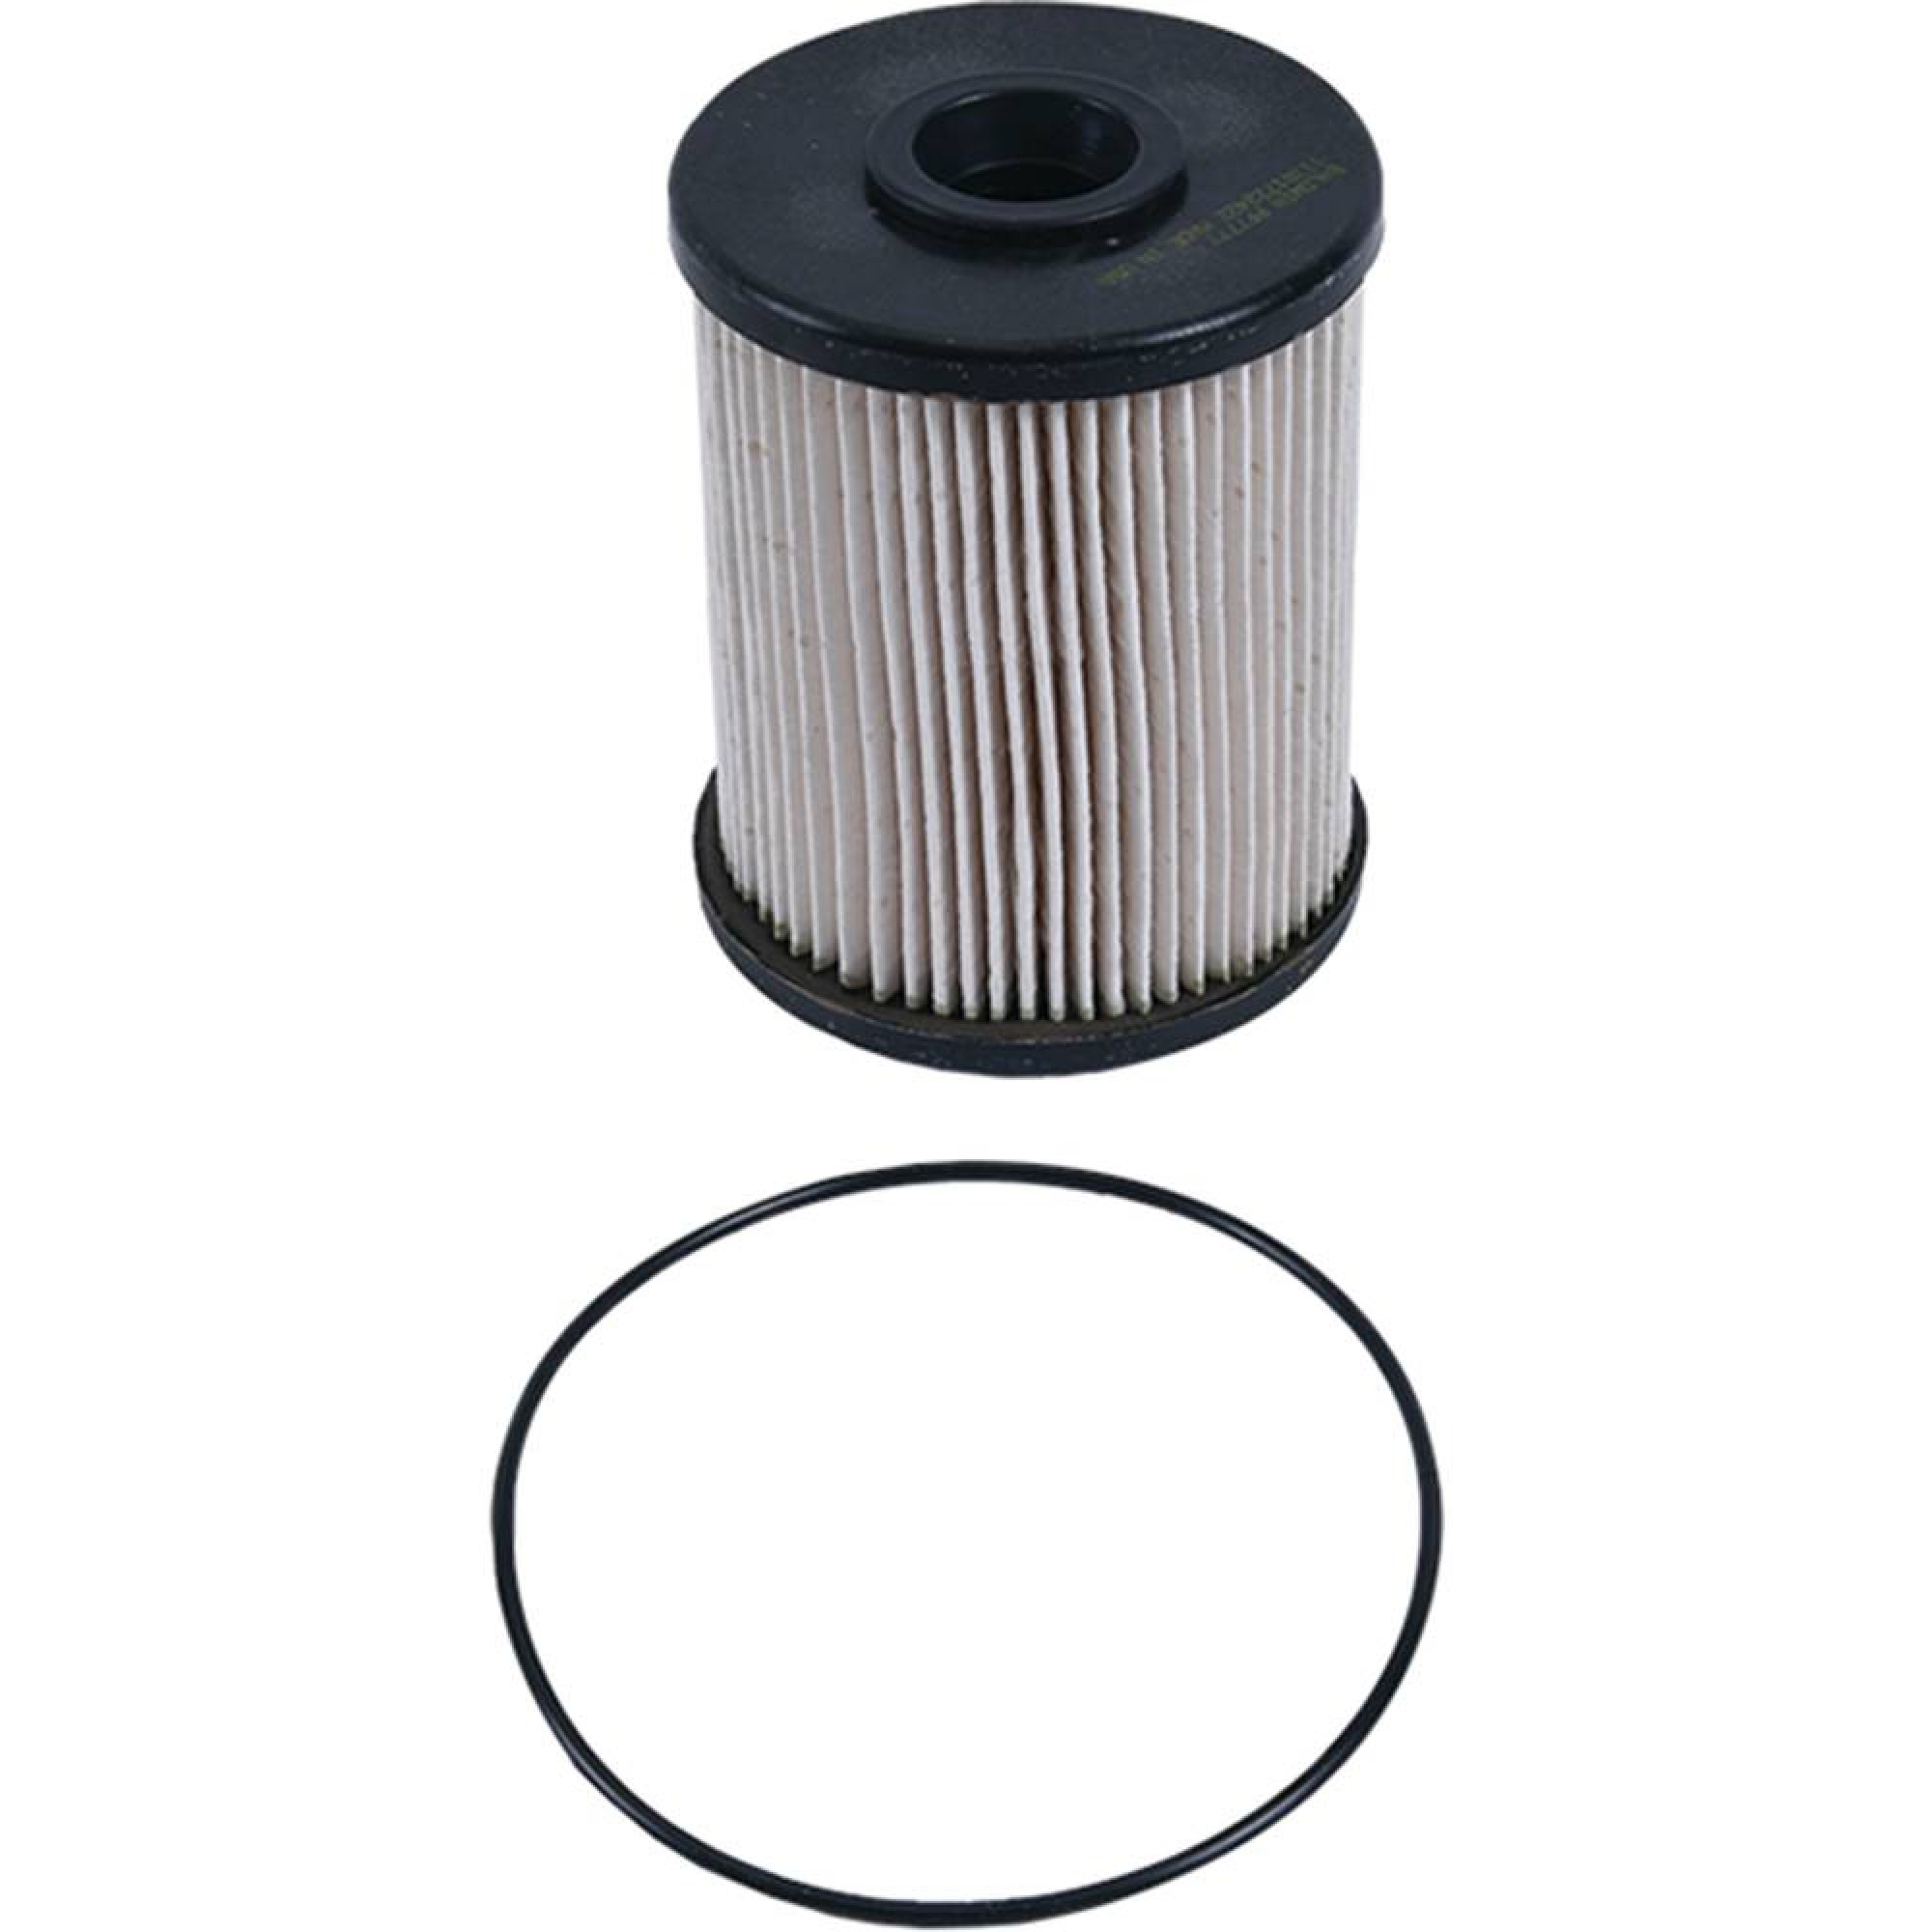 Complete Tractor Fuel Filter for Fleetguard FS1261 for Industrial Tractors; FF4120